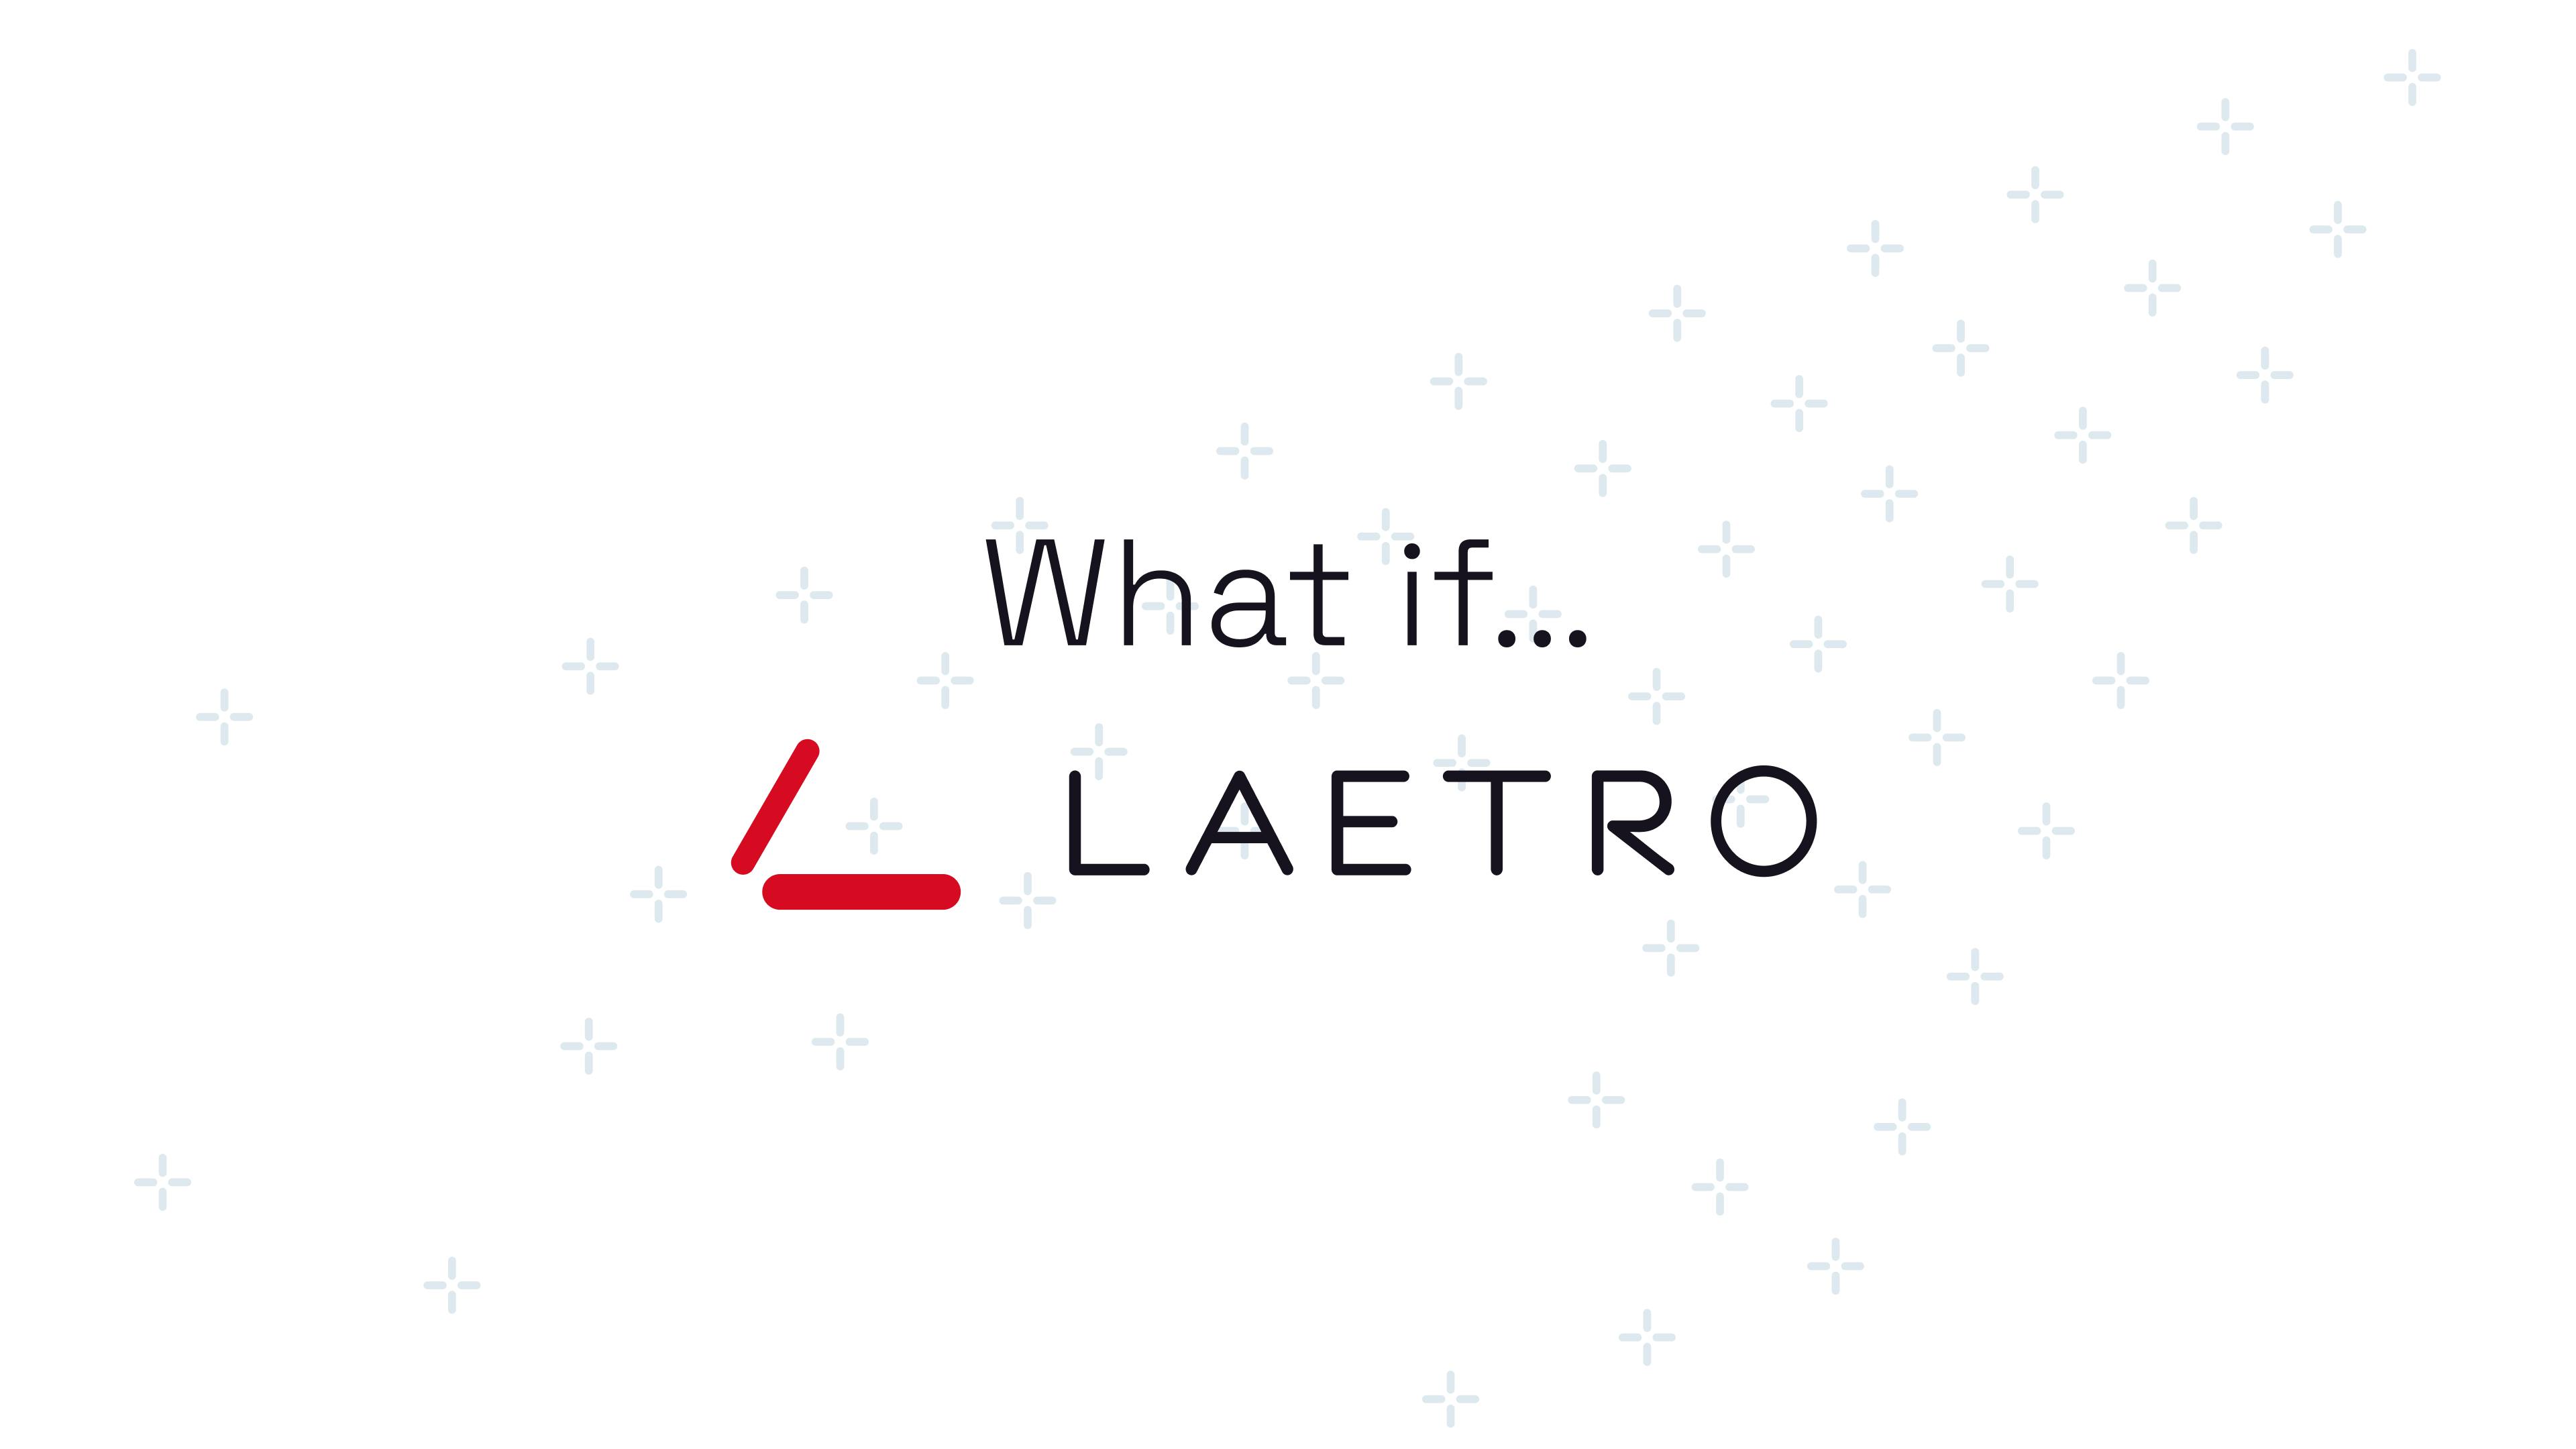 Article feature title image with the phrase "what if... laetro"